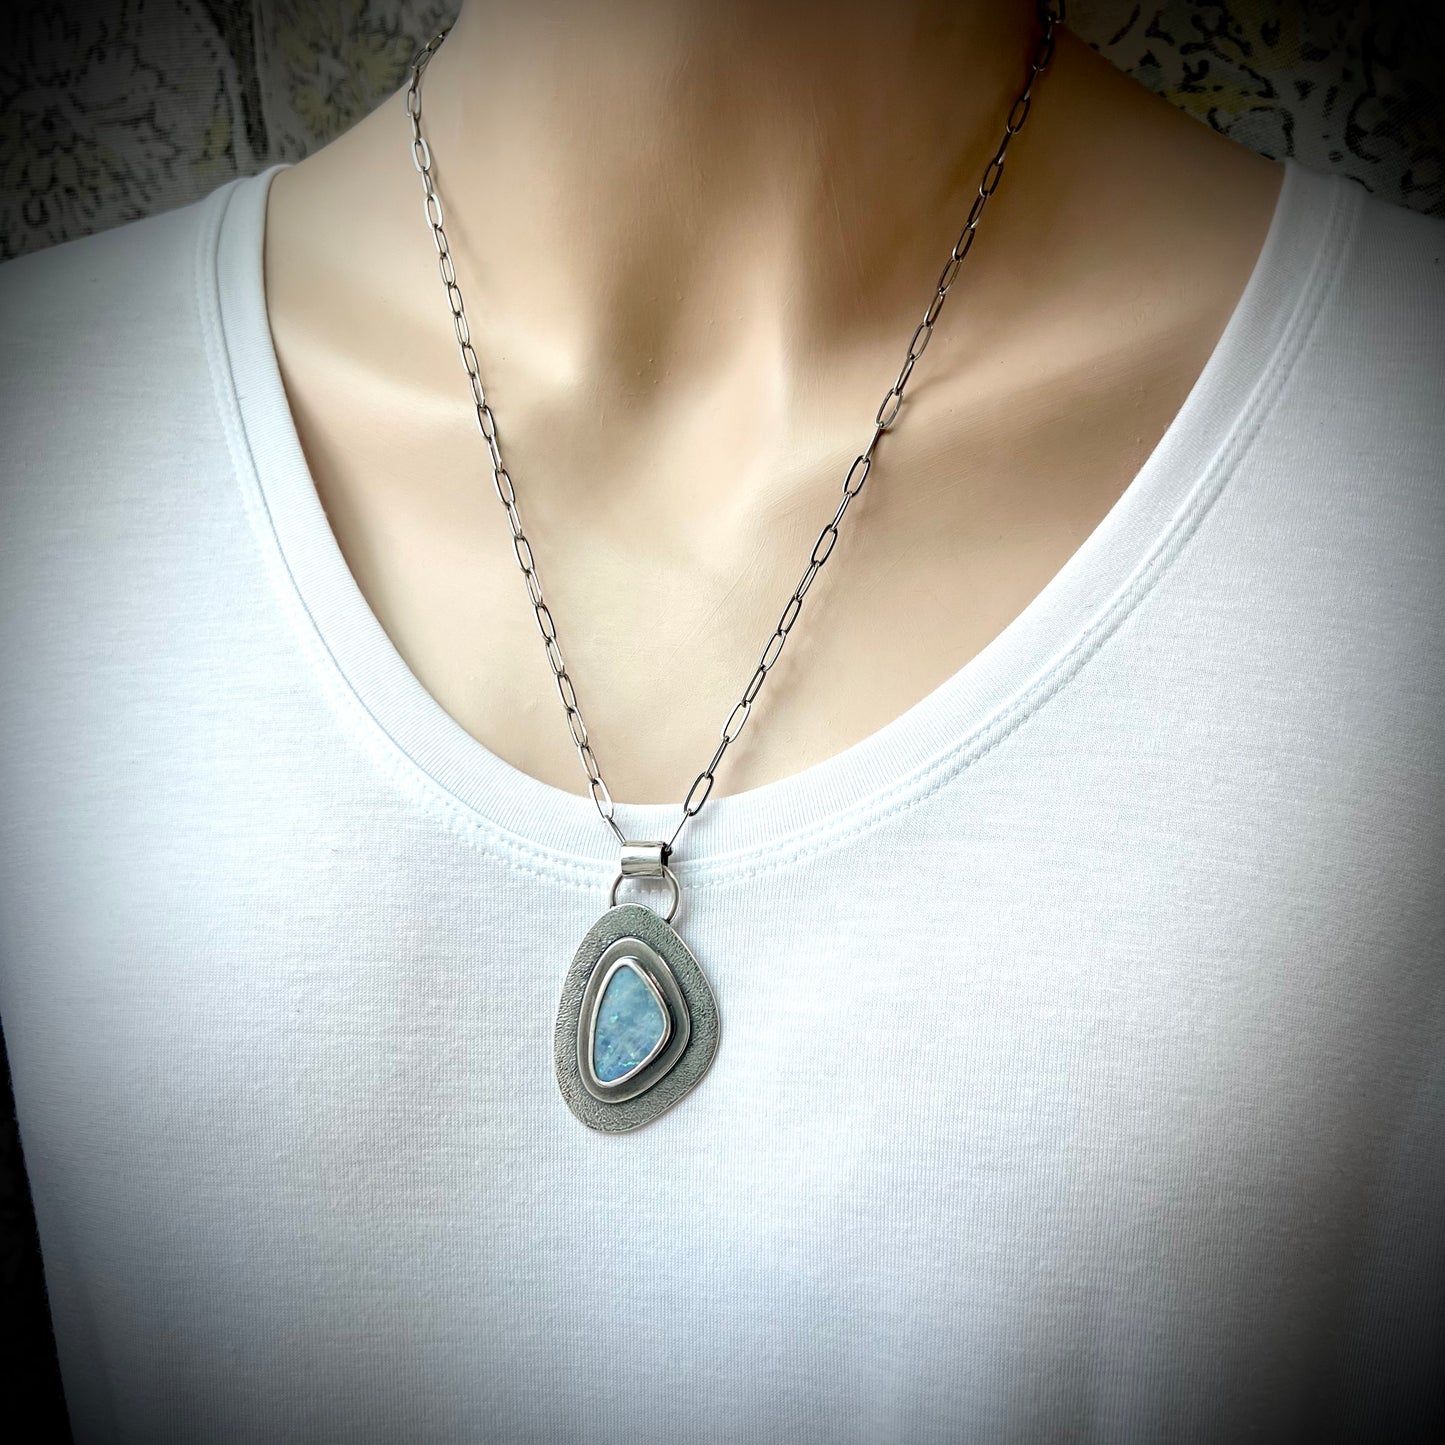 Opal Sterling Silver Necklace - Handmade One-of-a-kind Opal Doublet Pendant on Sterling Silver Chain